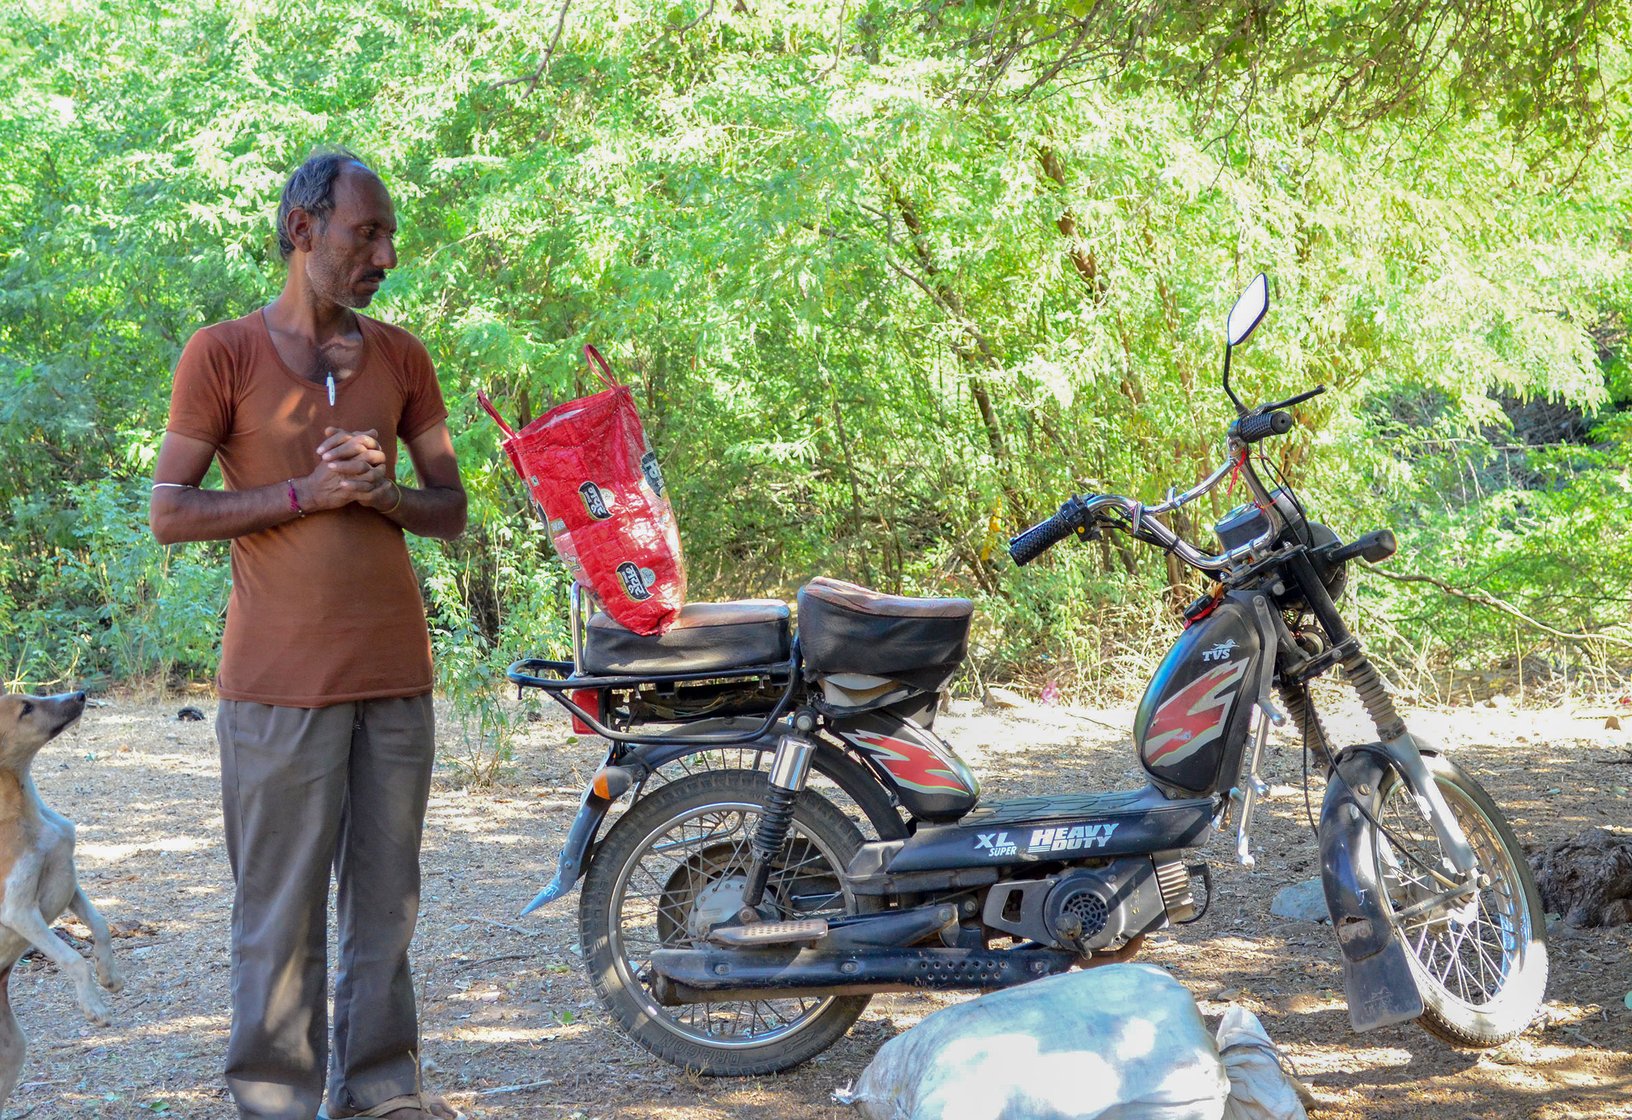 Jhujaram Dharmiji Sant with his moped and the sack of food on the ground